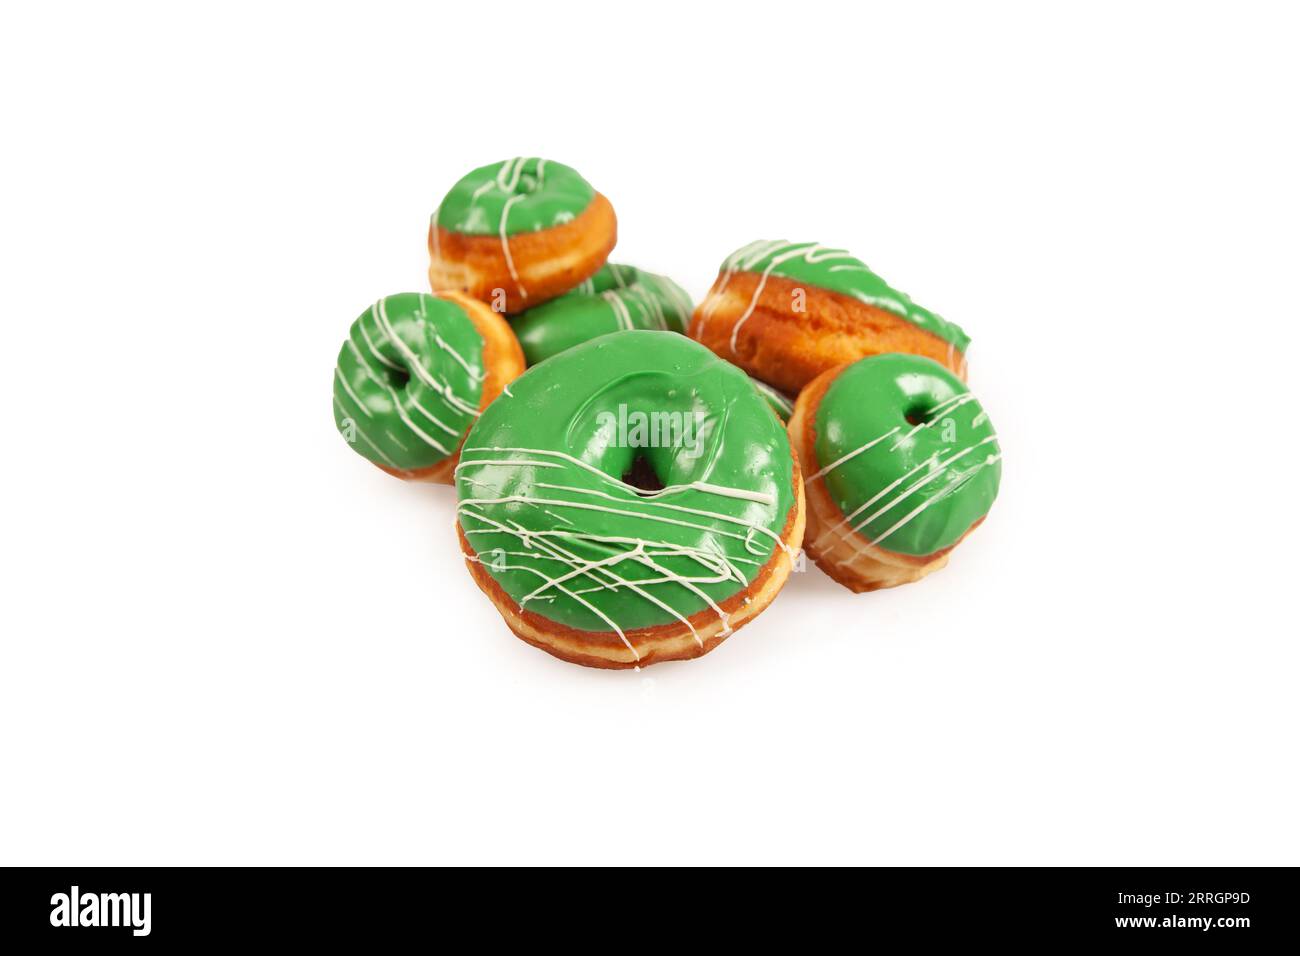 Green coloured large and mini doughnuts with white icing for special occasions. Stock Photo